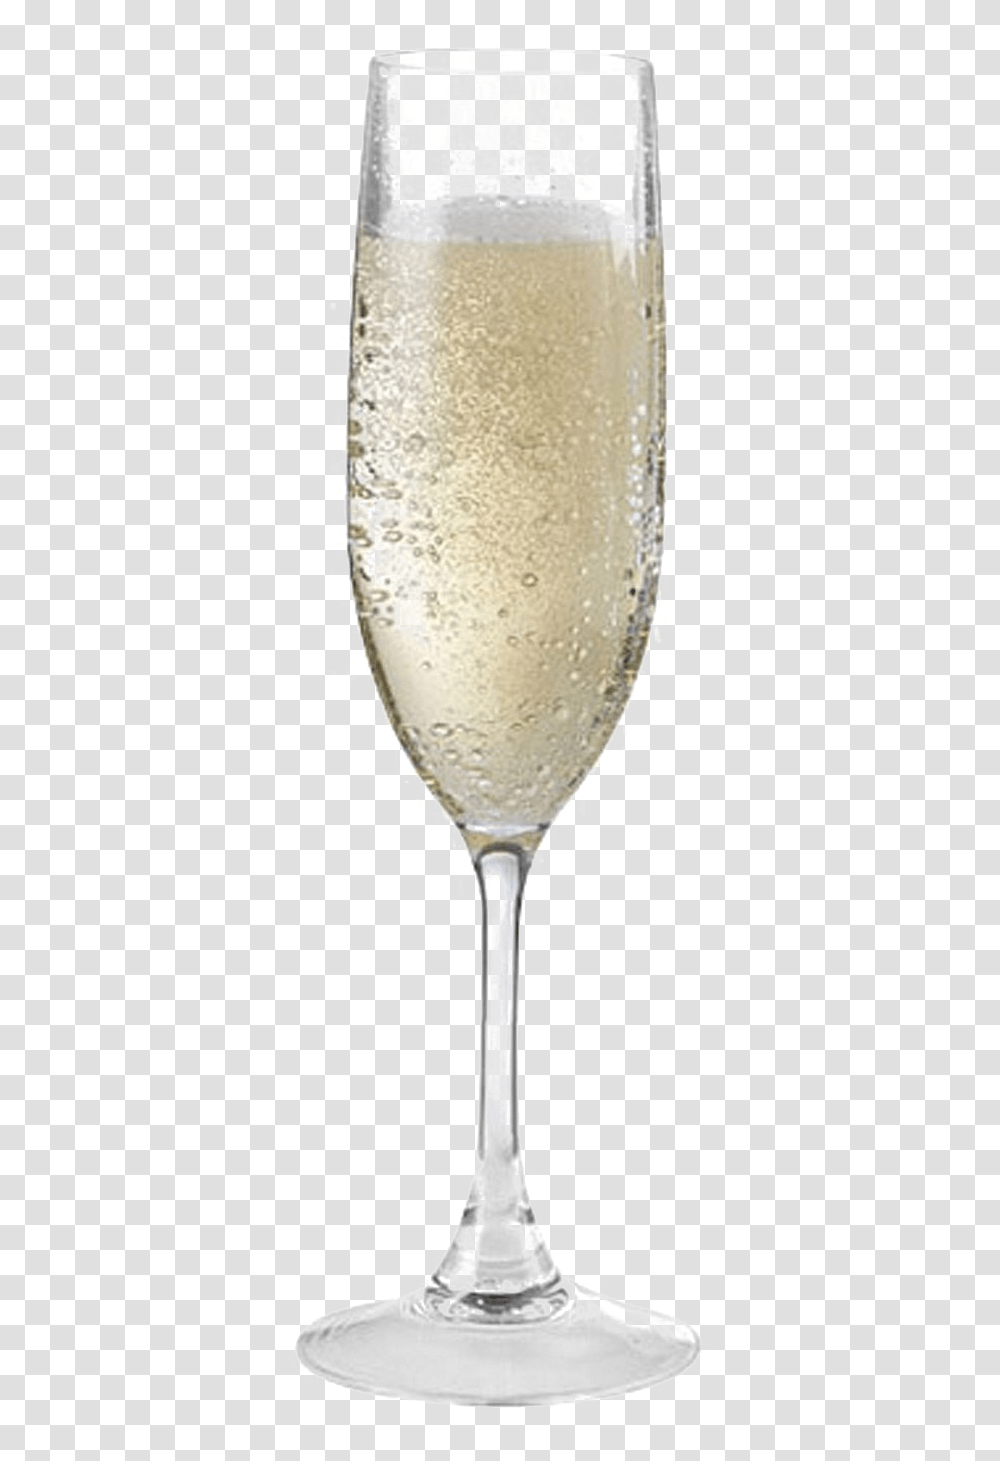 Champagne Glass Image Champagne Glass, Wine Glass, Alcohol, Beverage, Drink Transparent Png